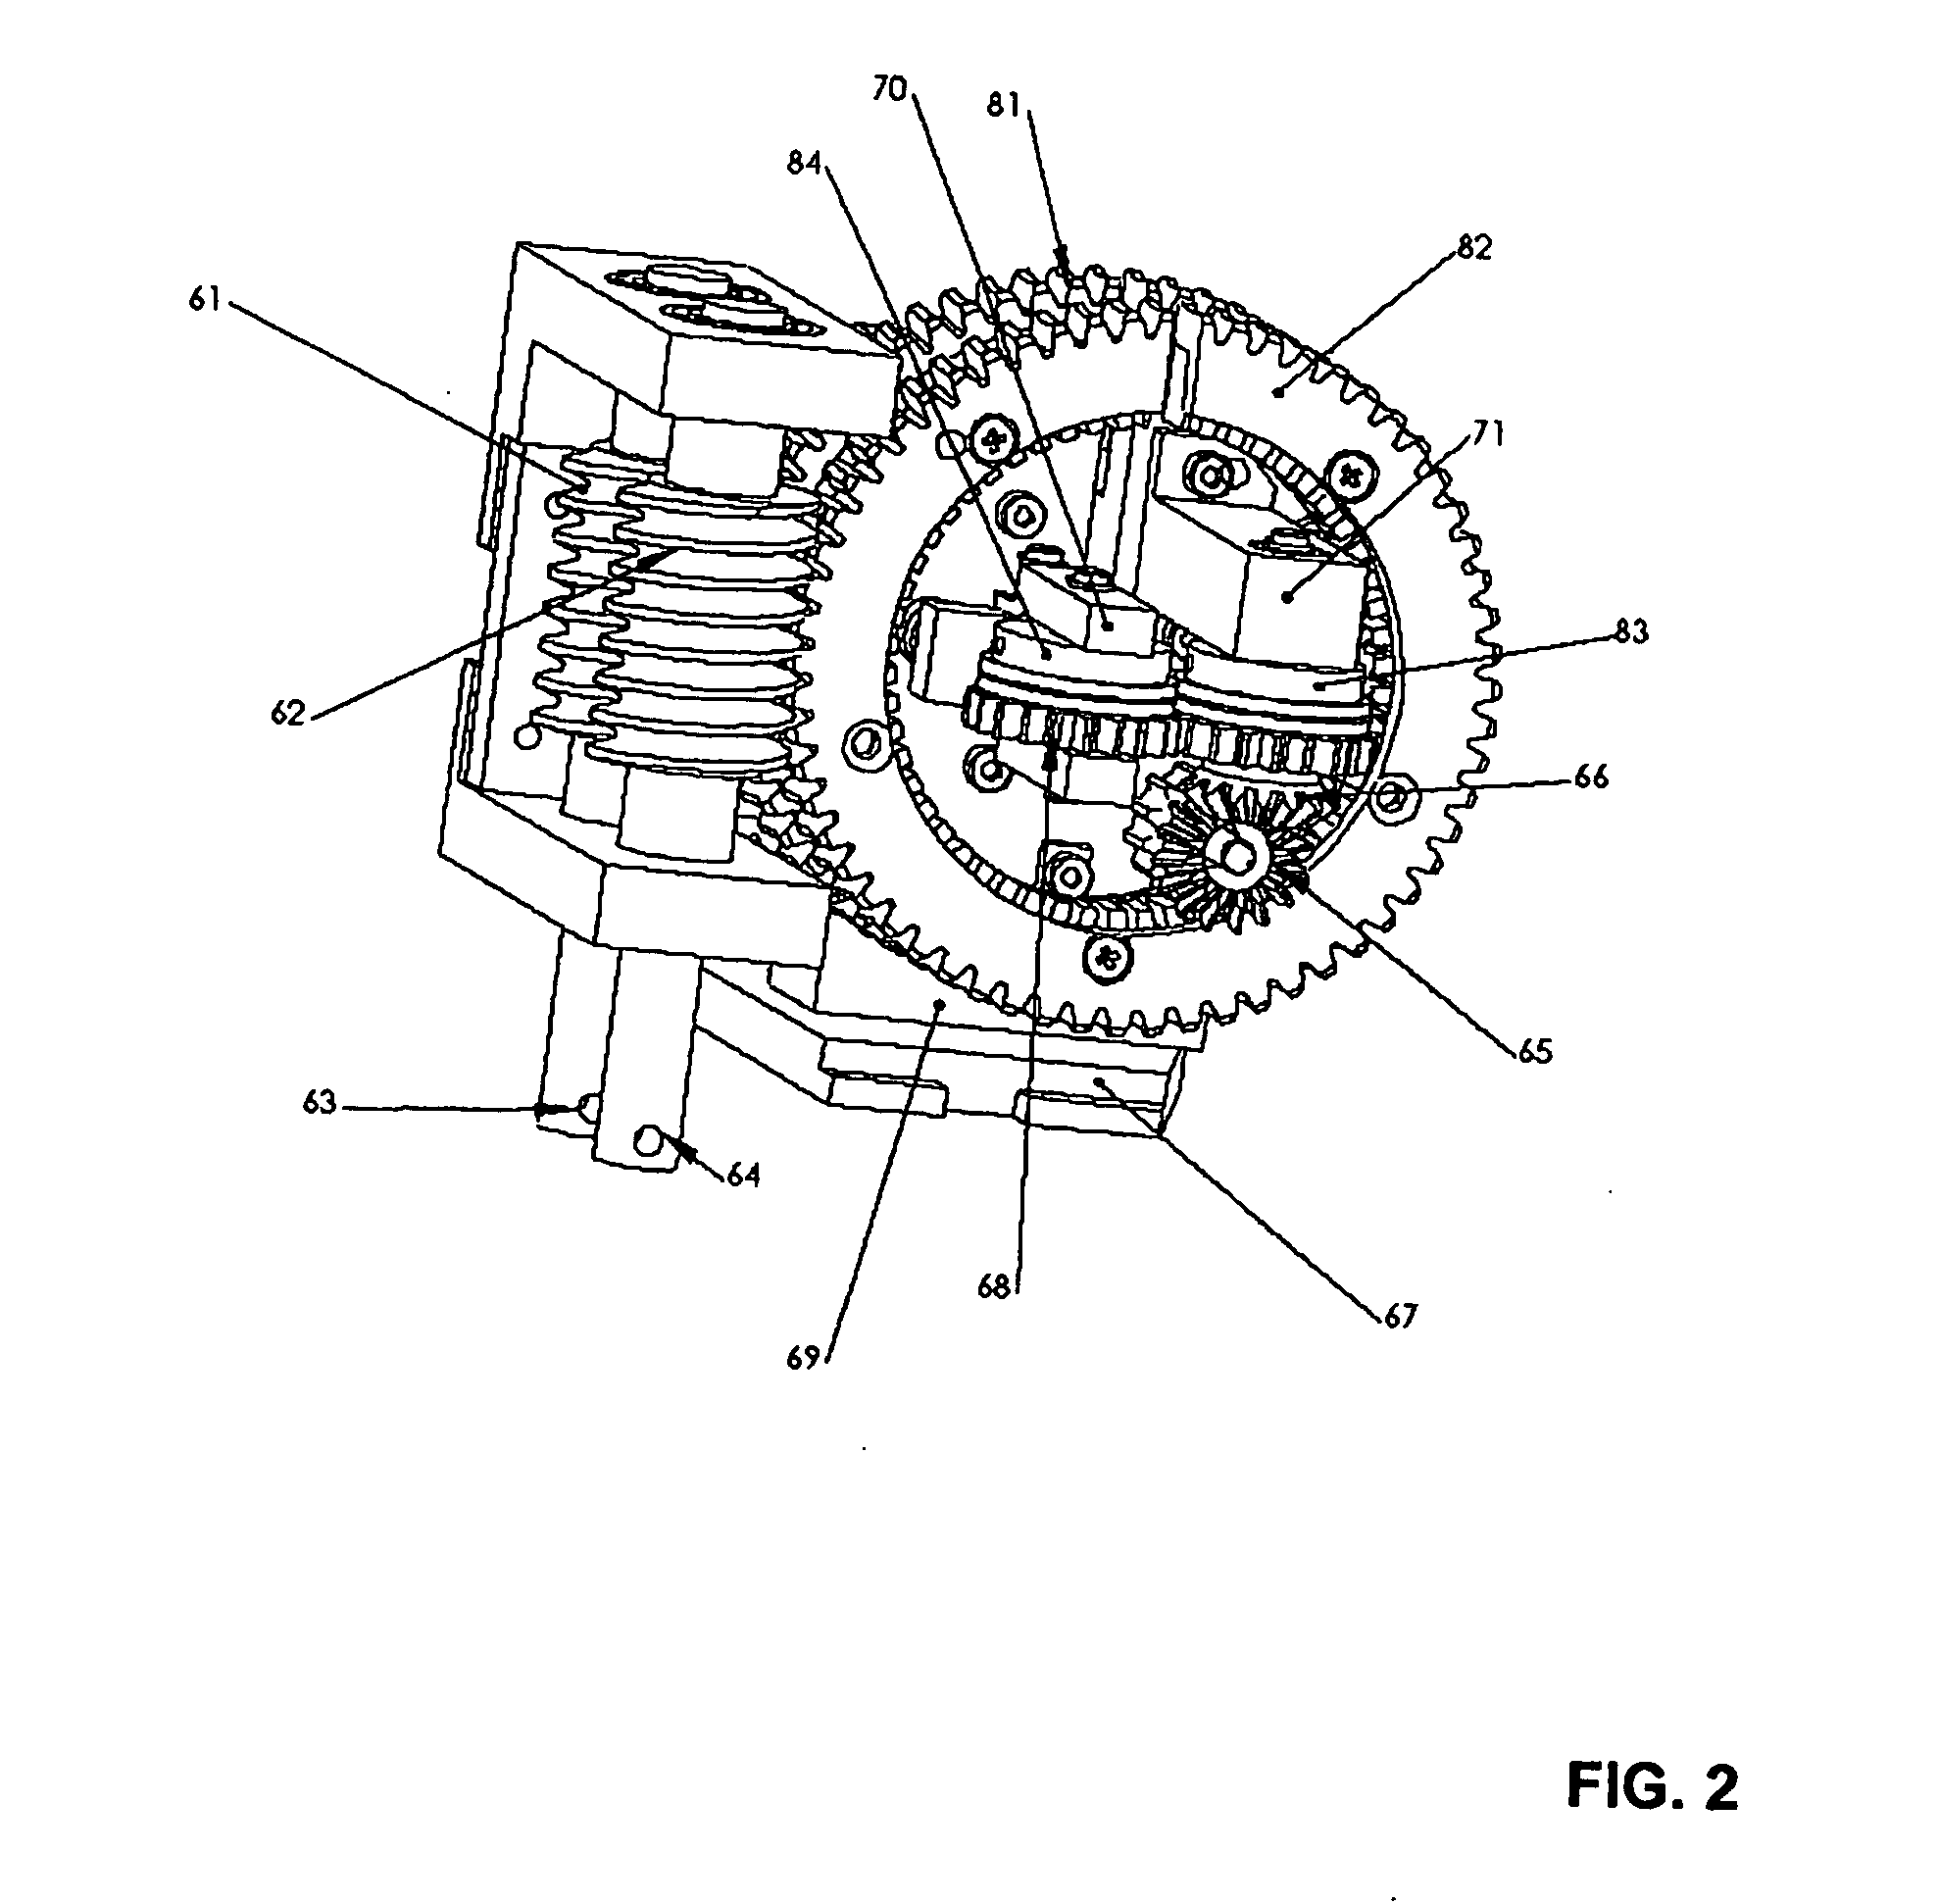 Transmission for a remote catheterization system